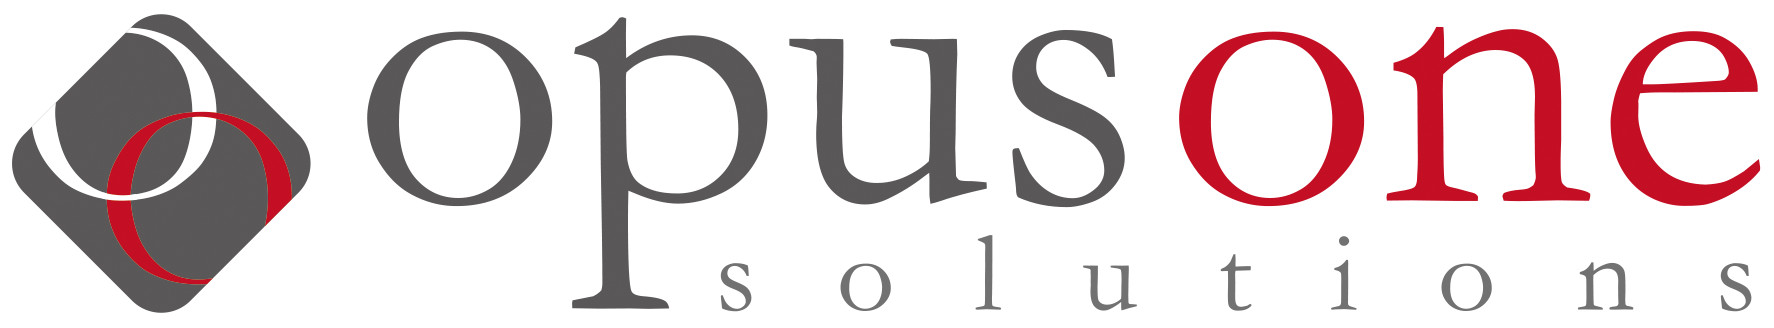 Opus One Solutions’ 